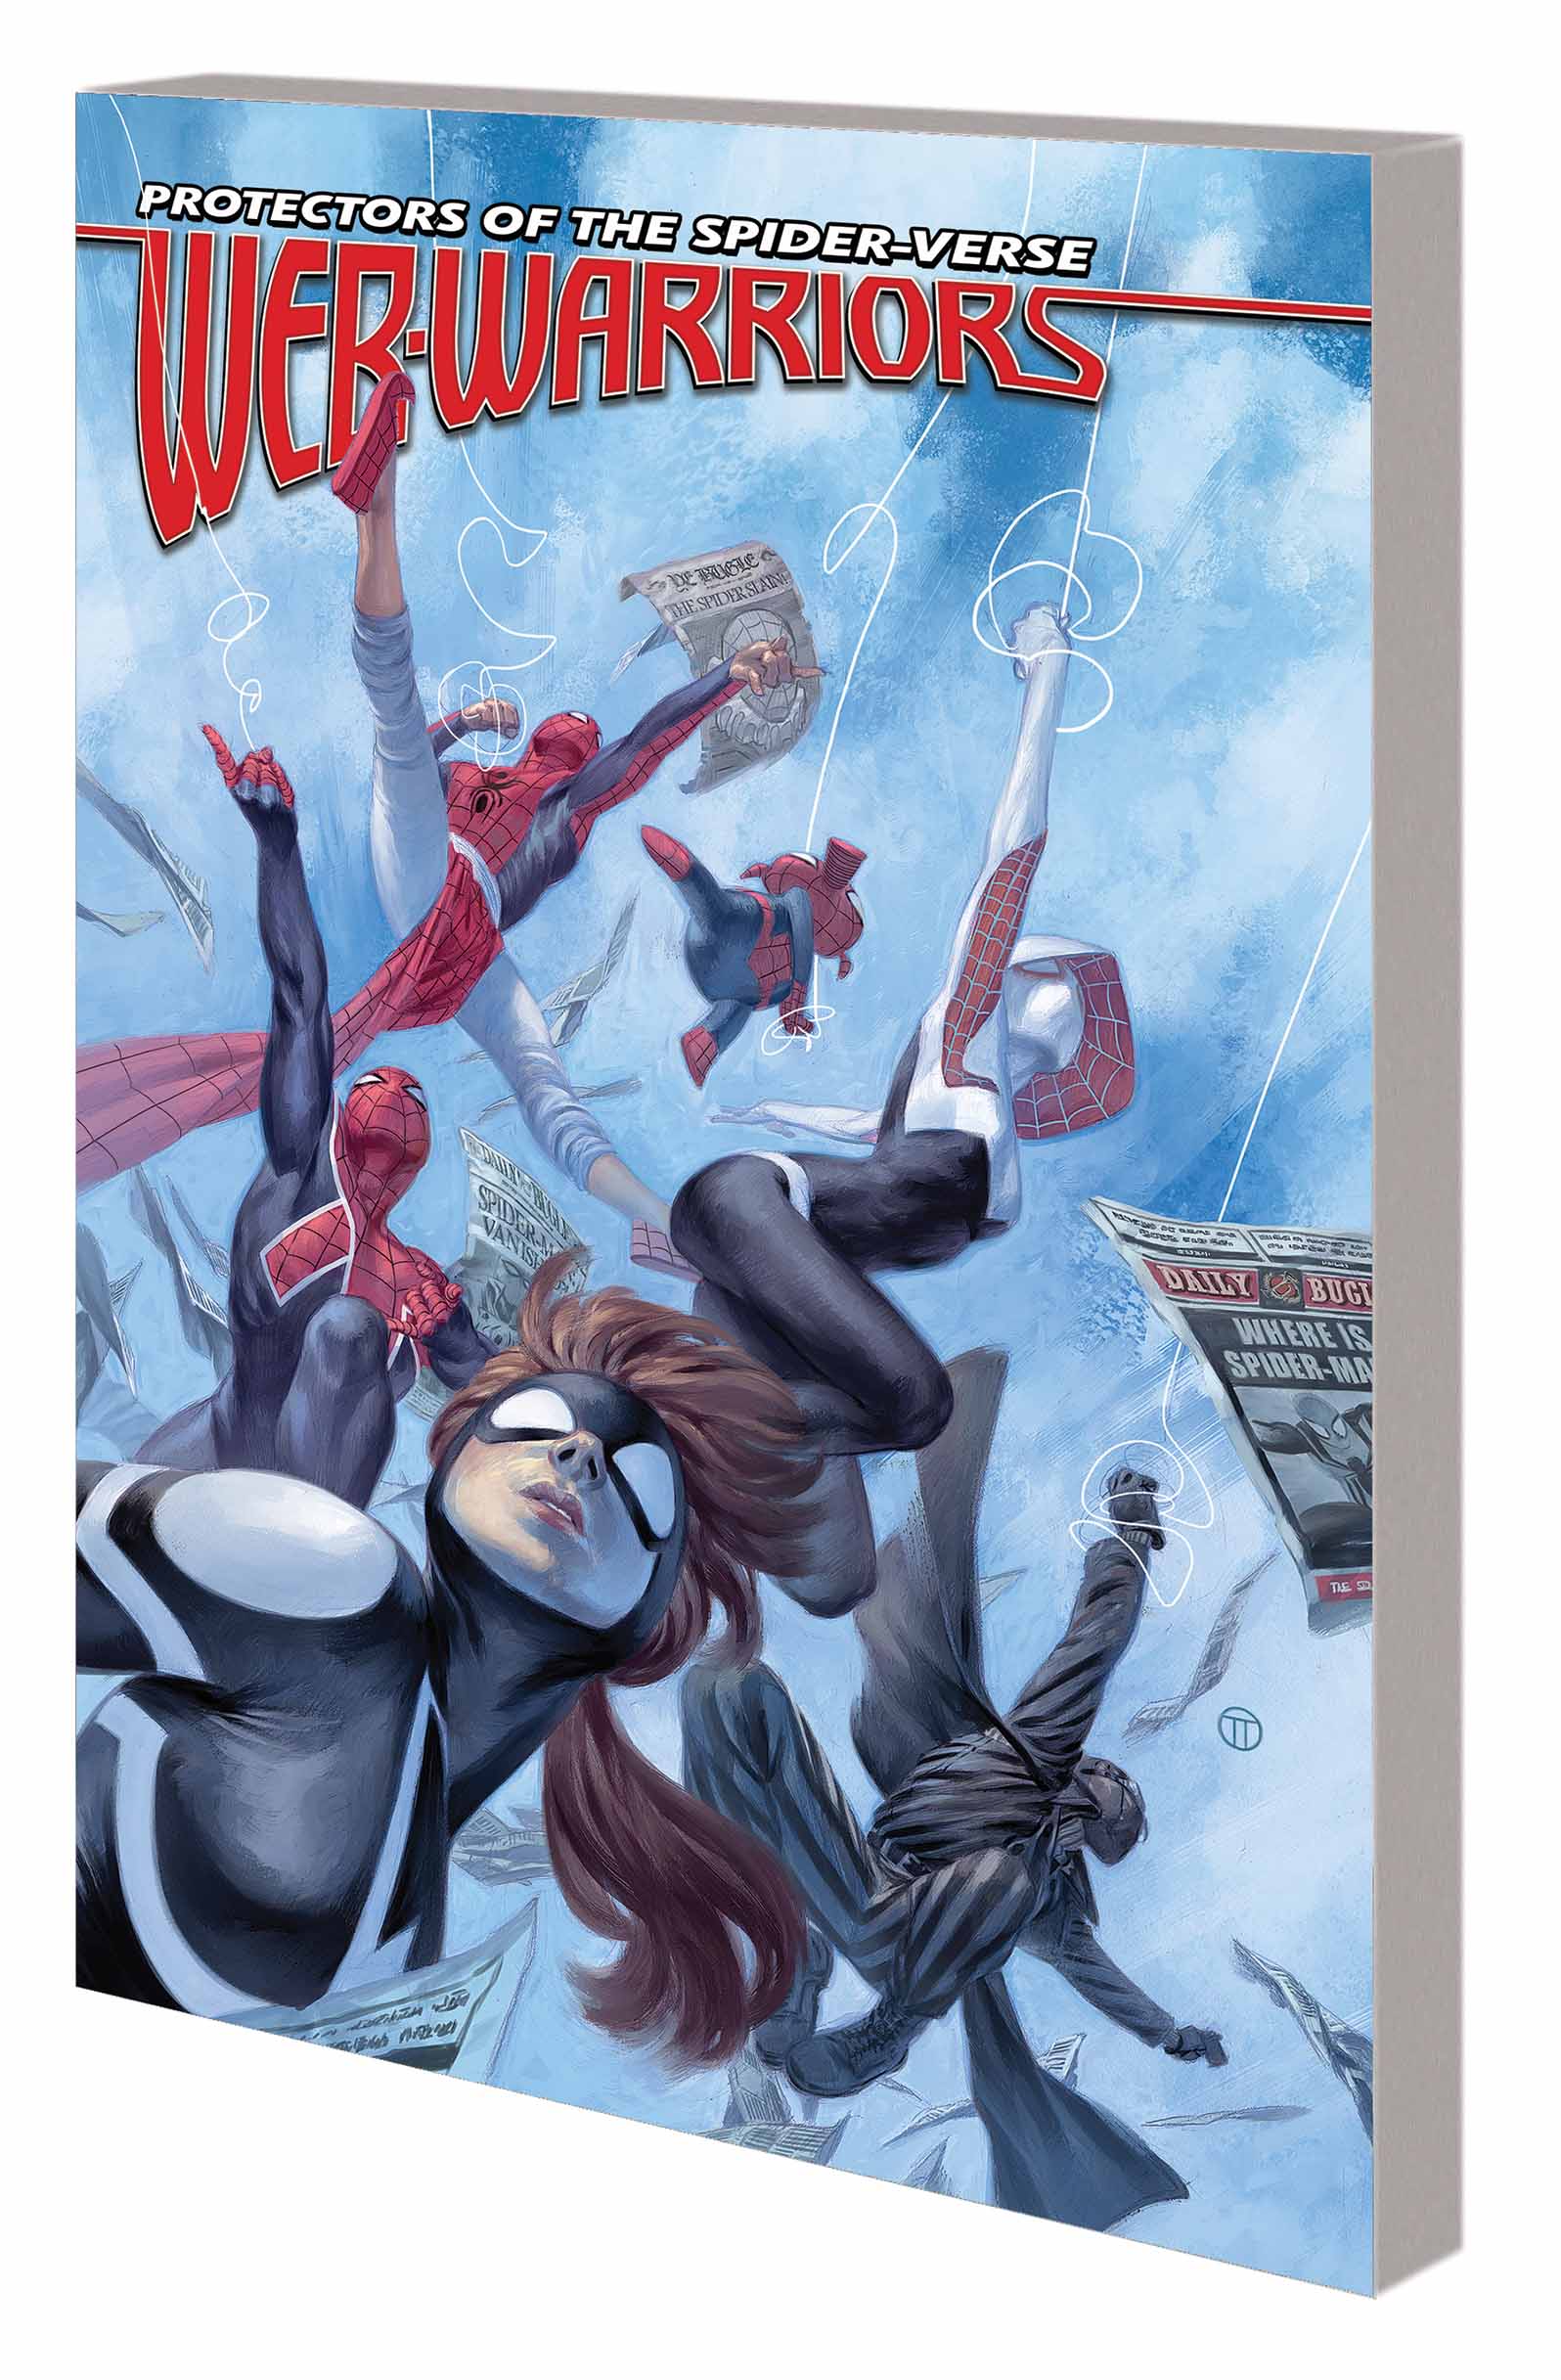 WEB WARRIORS OF THE SPIDER-VERSE VOL. 1 - ELECTROVERSE TPB